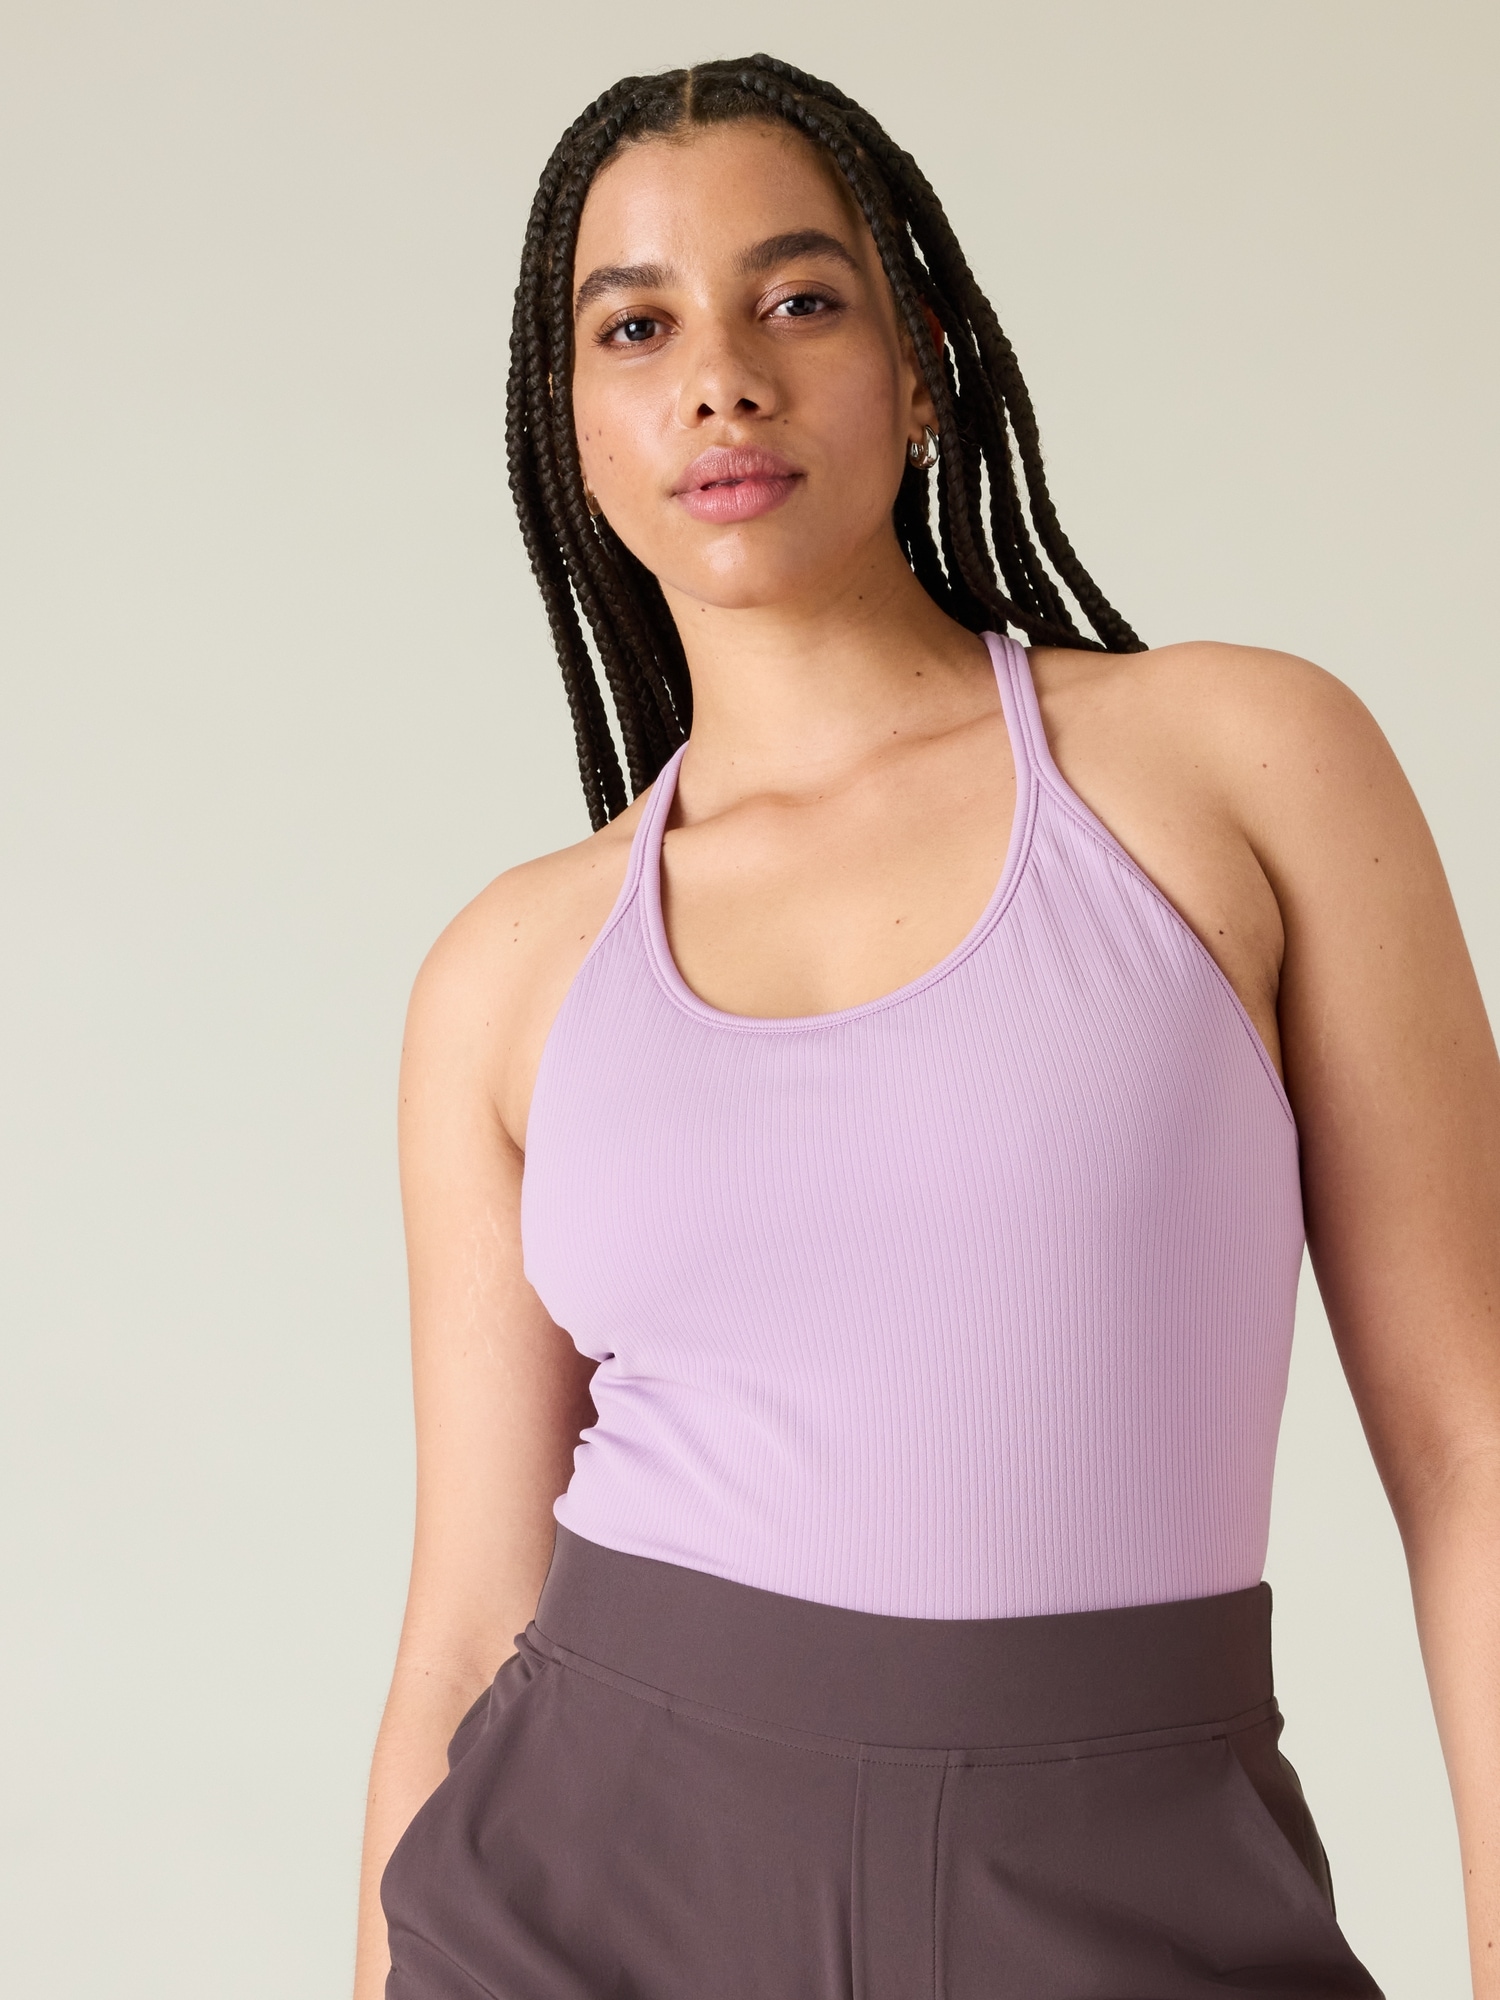 Athleta Bra with Insert for Post Mastectomy with Dr. Reams Concierge PT 